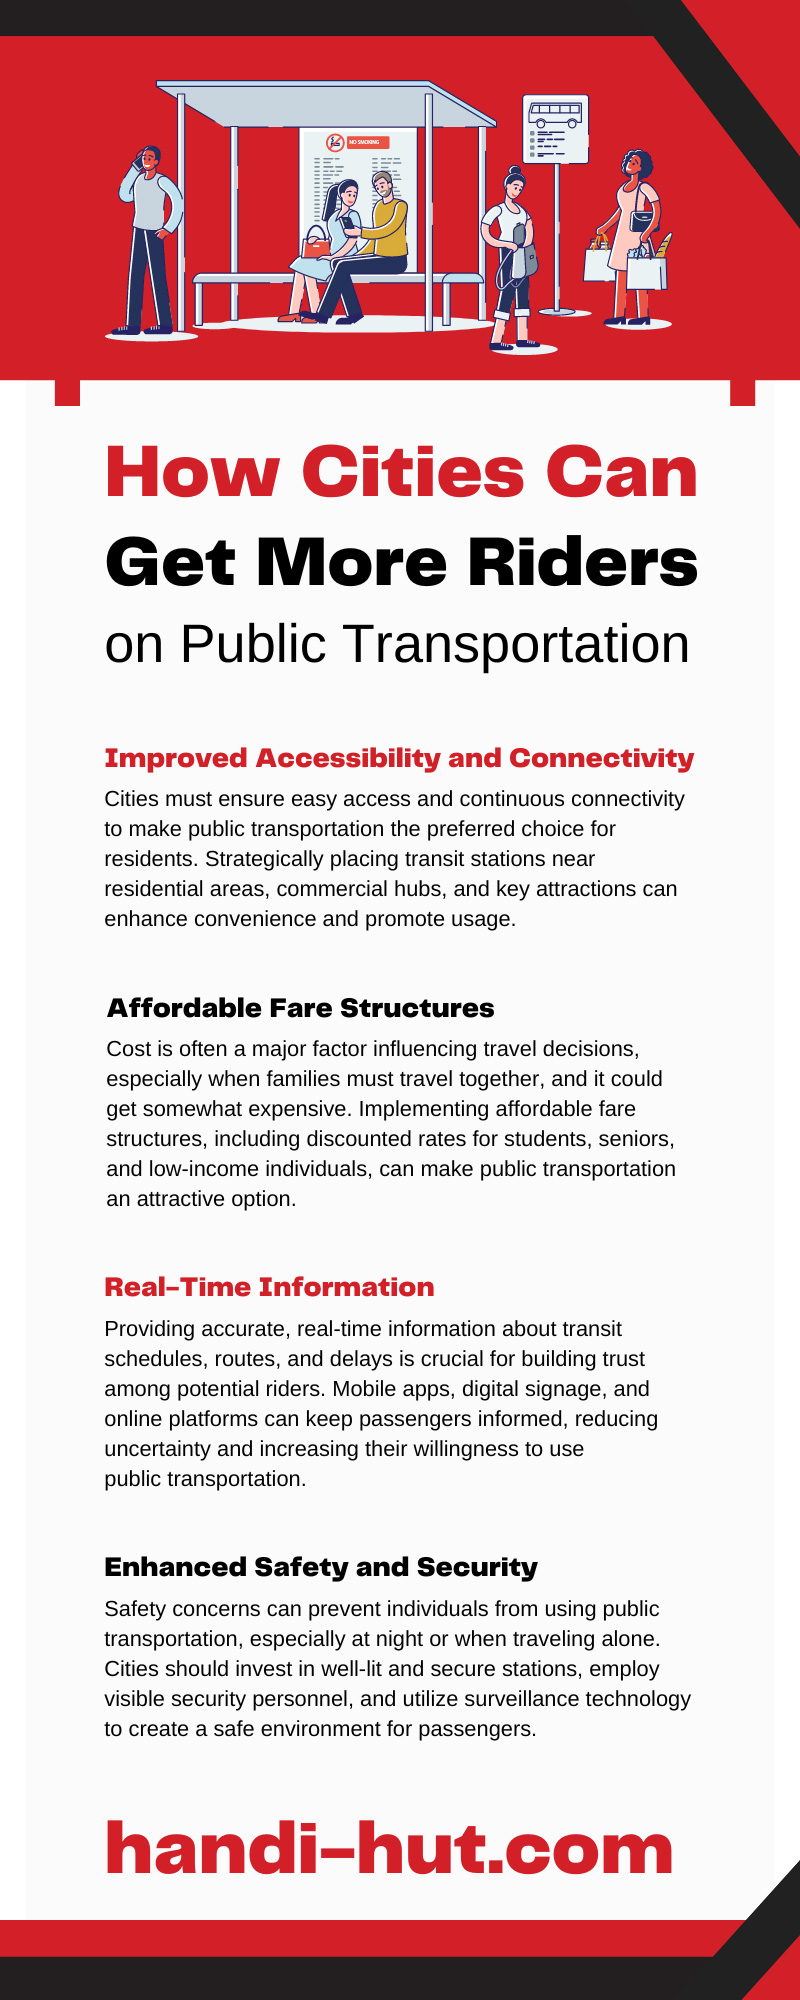 How Cities Can Get More Riders on Public Transportation